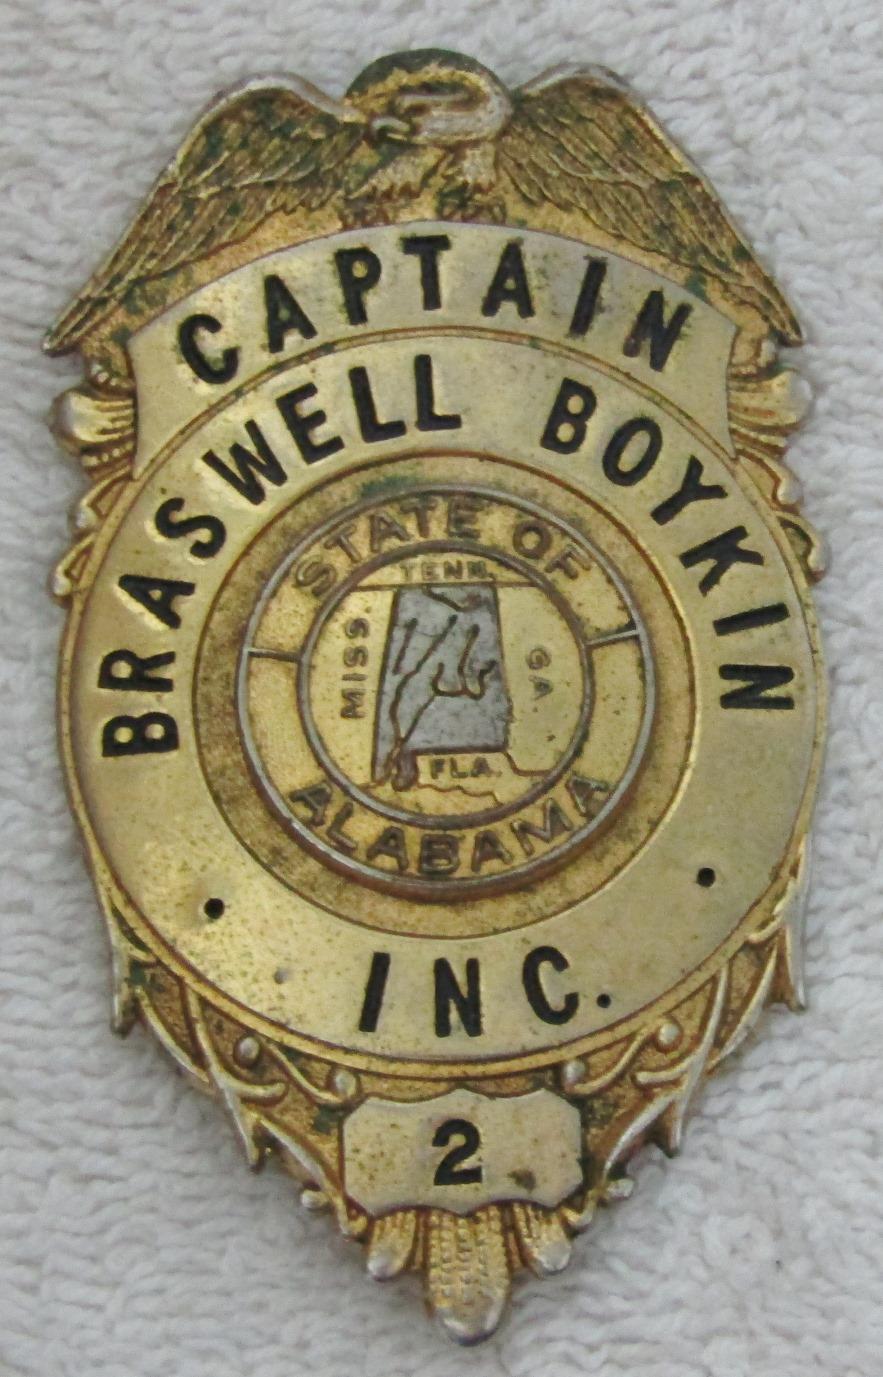 Ca. 1960-70's "BRASWELL & BOYKIN INC. CAPTAIN"  Badge-Alabama Private Security Firm-Numbered